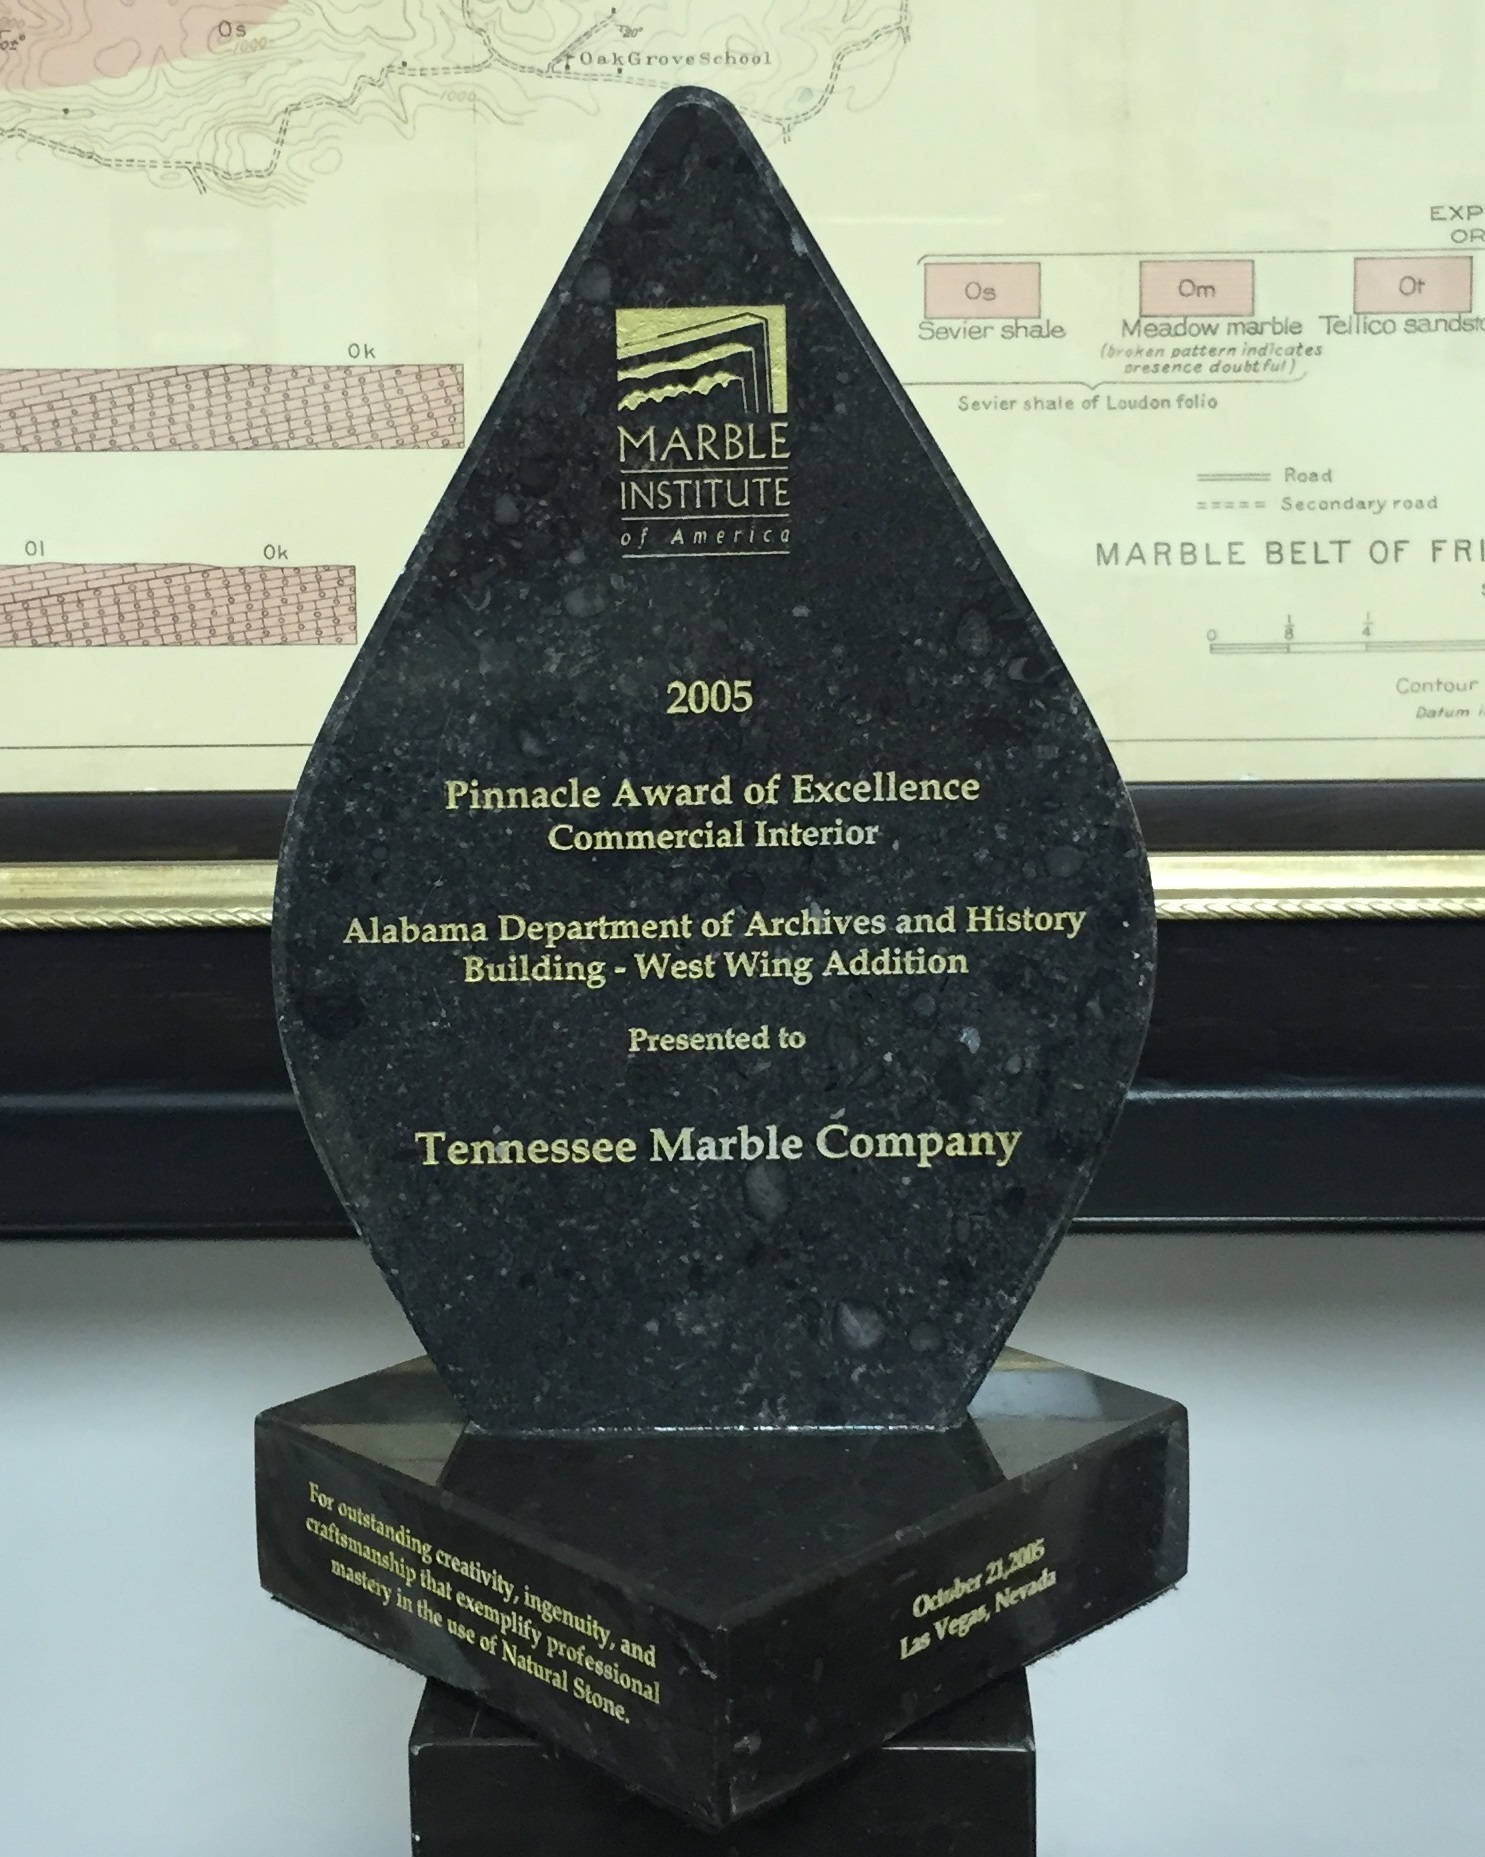 2005 Pinnacle Award of Excellence Commercial Interior